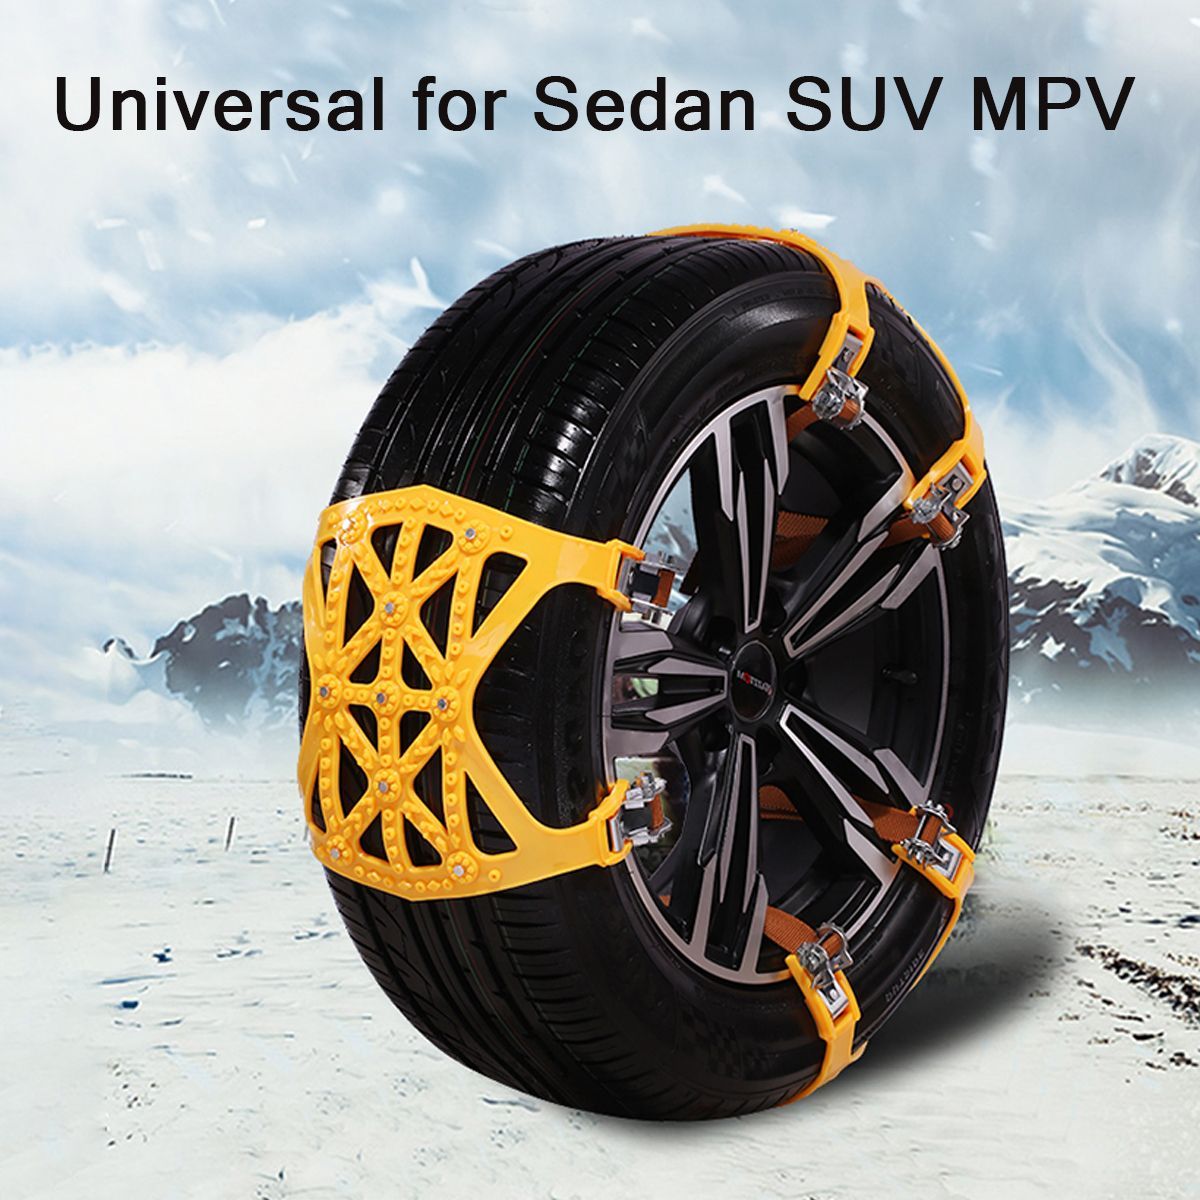 Emergency-Gear-Clasp-Car-Snow-Chain-Wheel-Tyre-Anti-skid-TPU-Chain-for-Ice-Mud-Sand-Safety-Driving-1602324